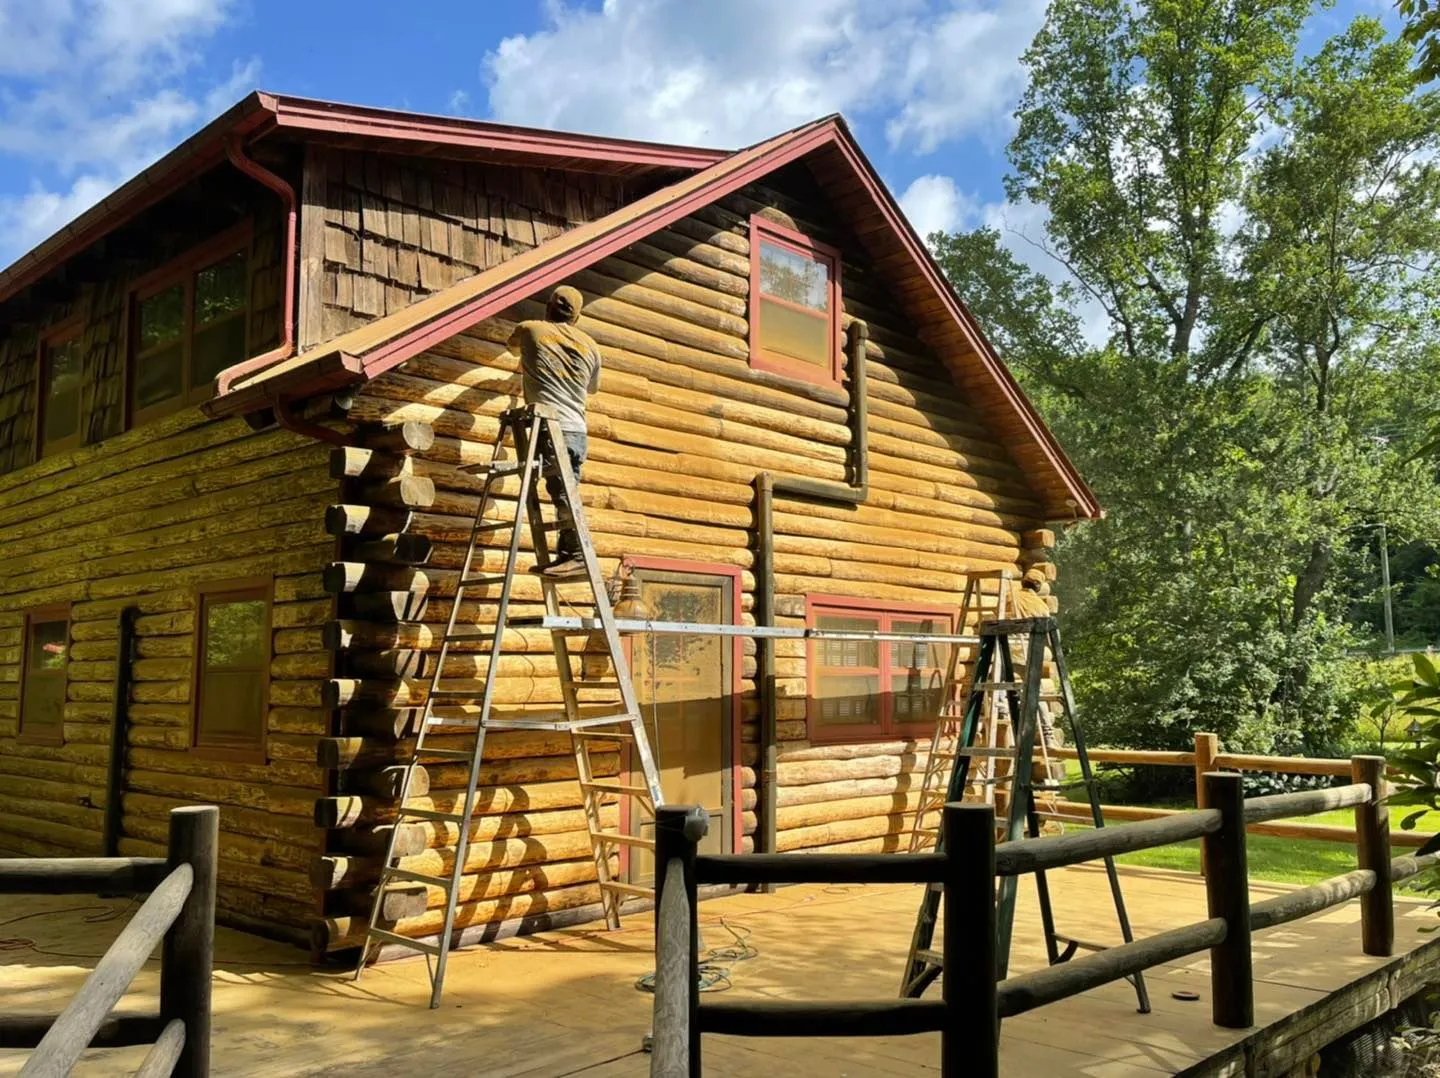 Home and Wood Staining for Lagunes Pro in Boone, North Carolina